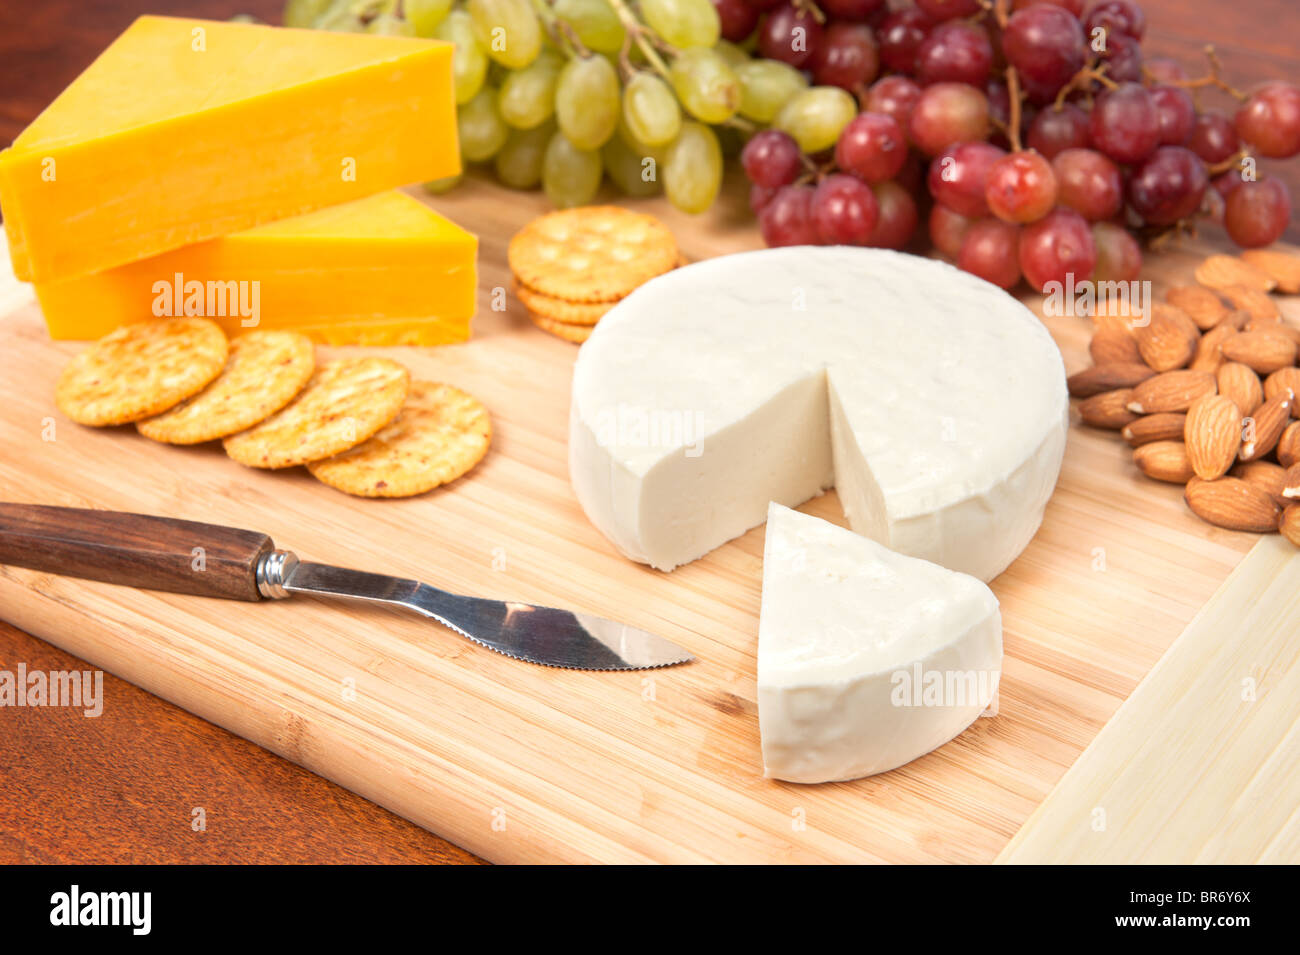 A cheese tray with fruit, crackers and almonds. Stock Photo